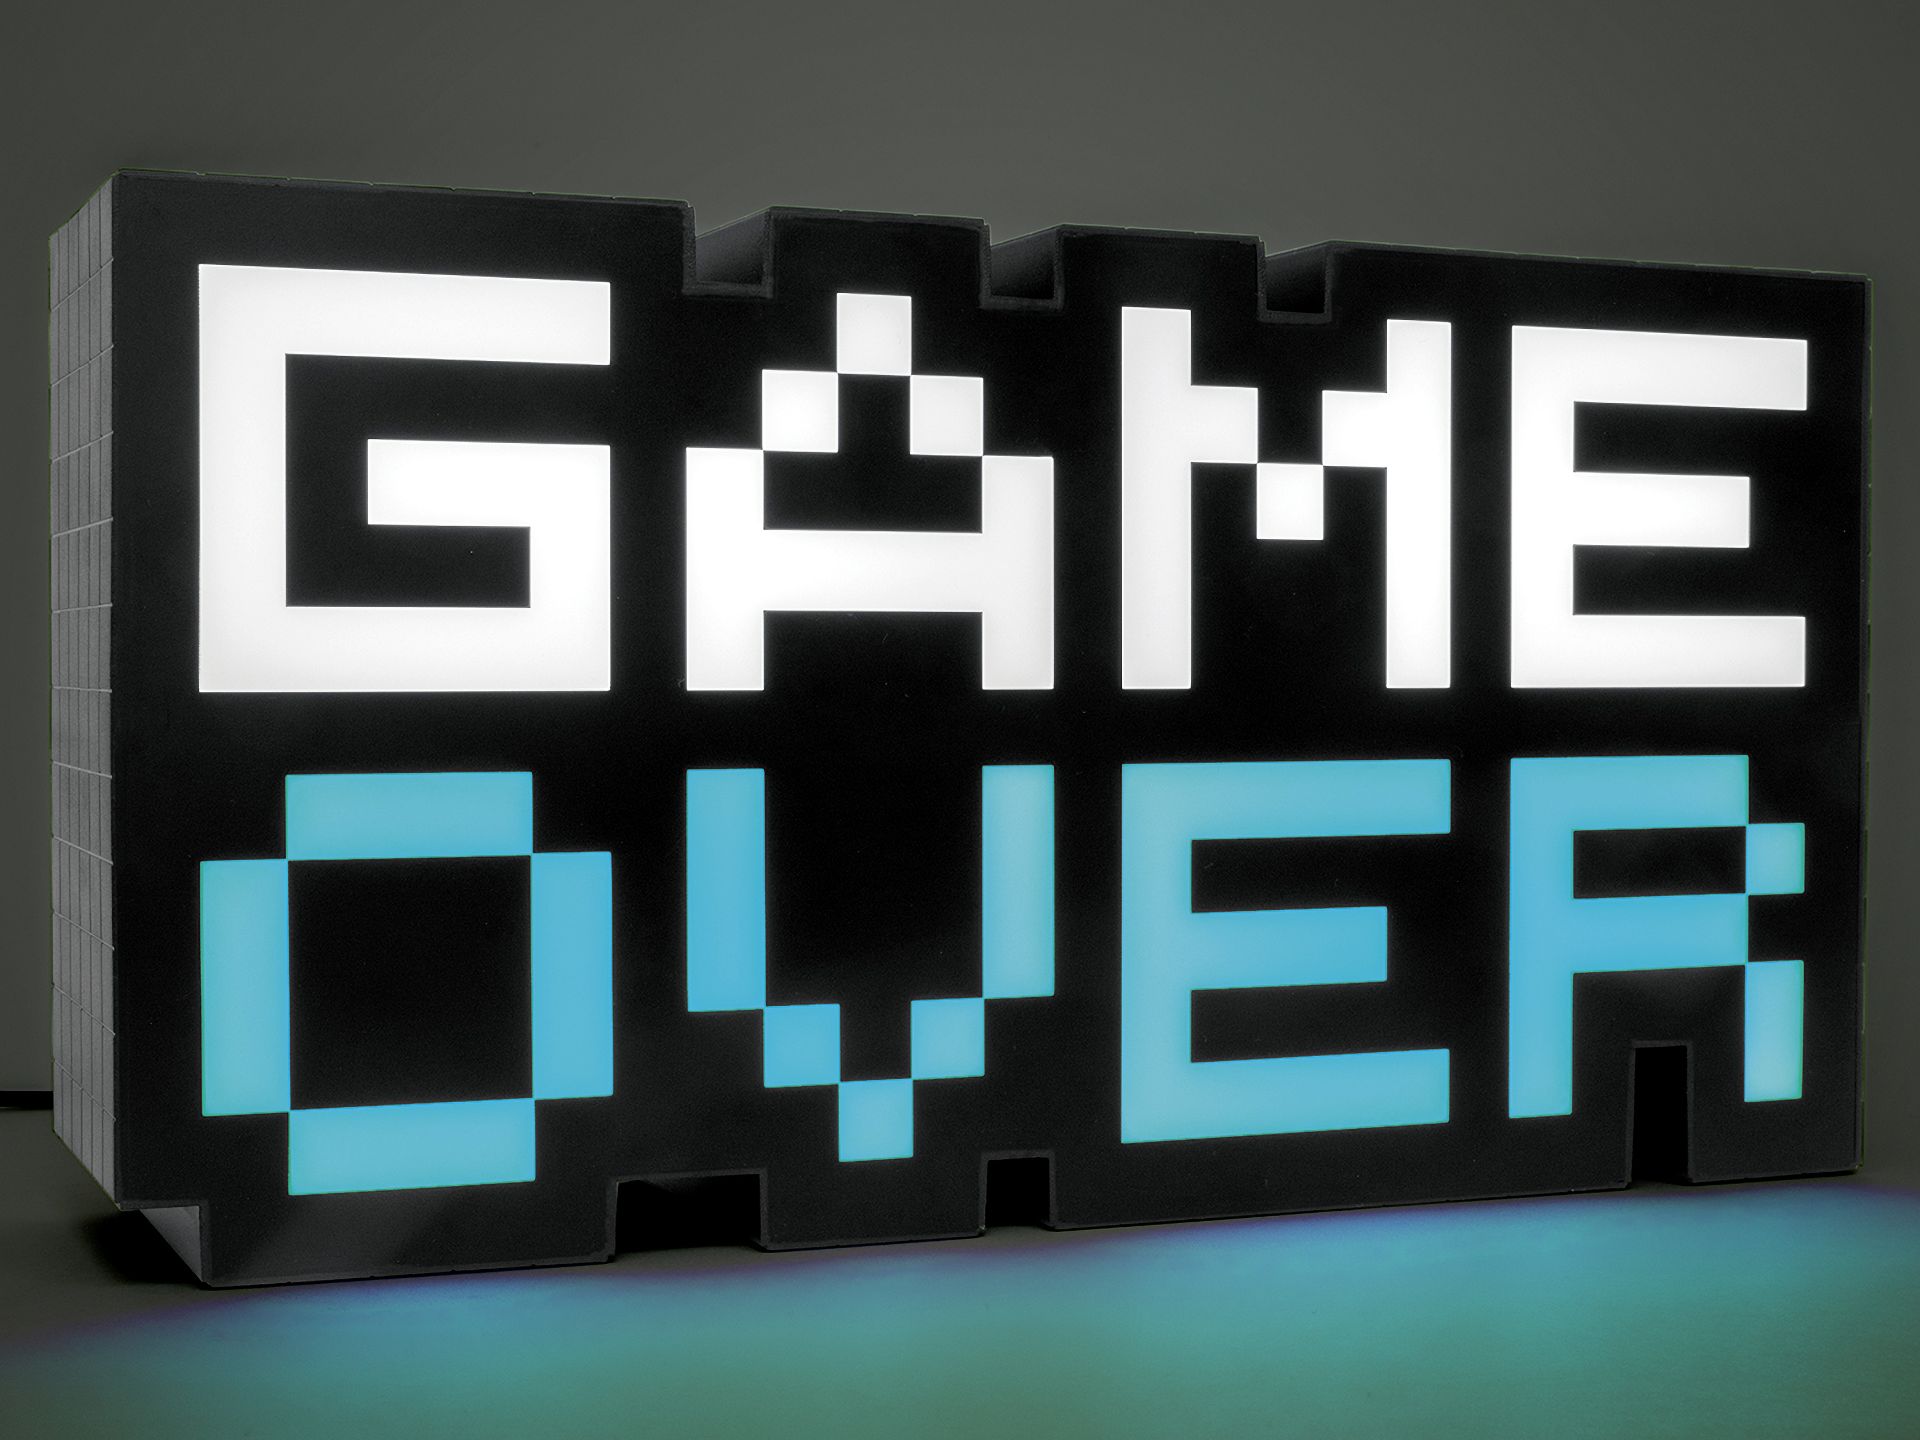 video game, game over